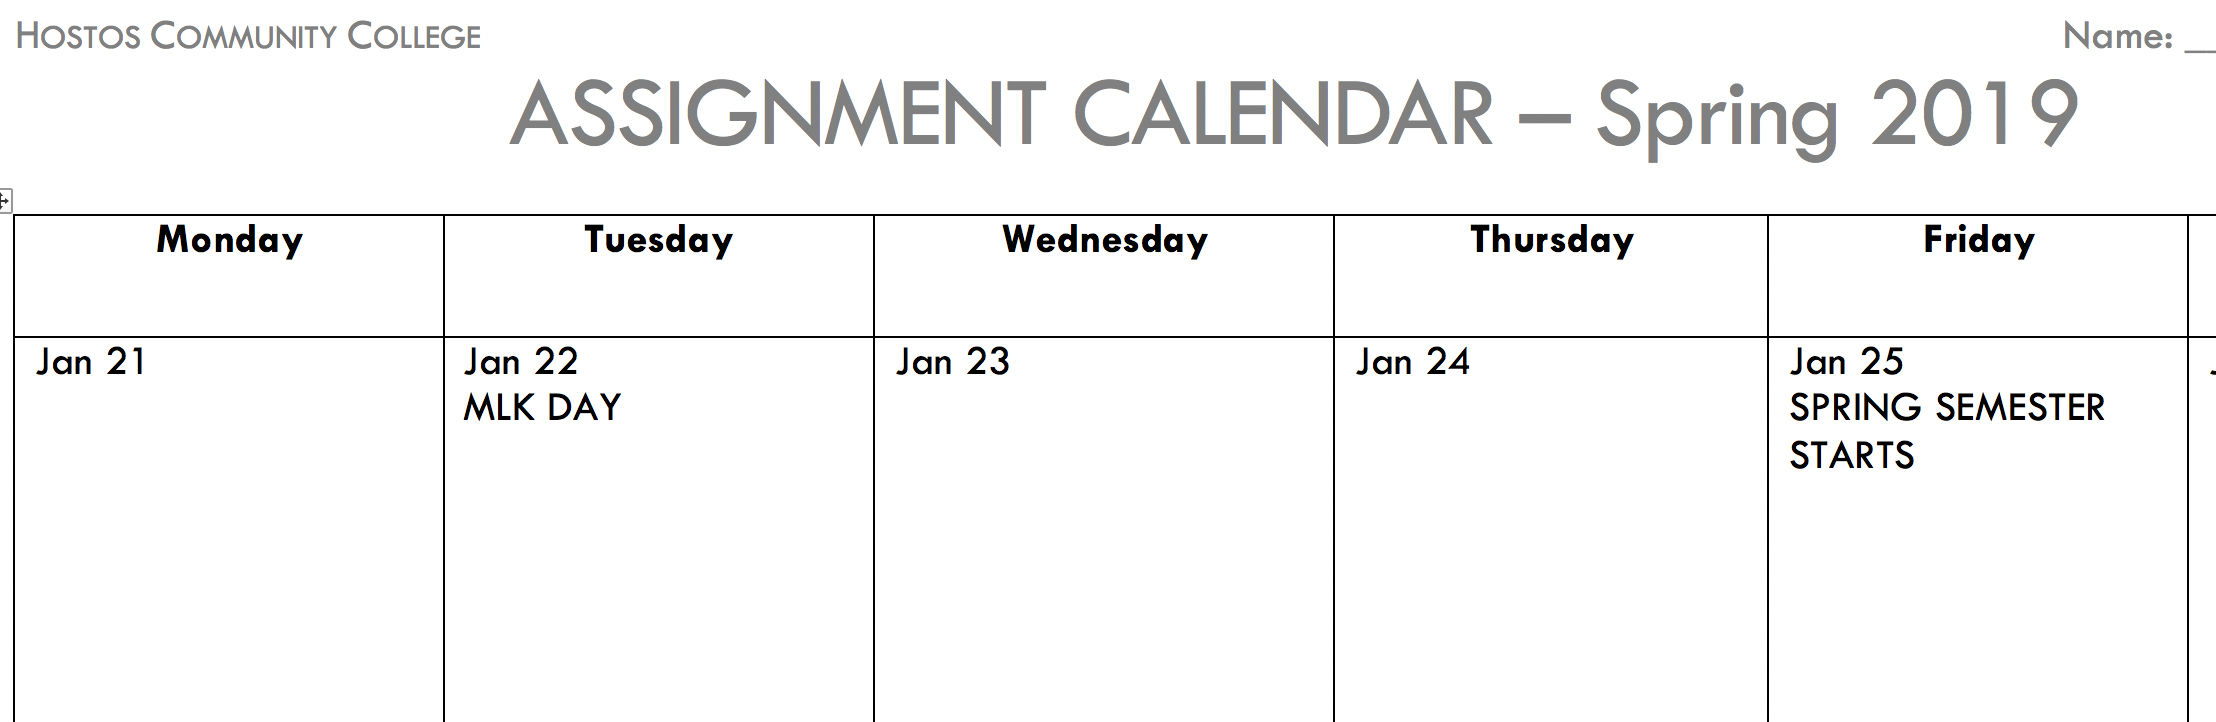 Screenshot of calendar with heading "Assignment Calendar-Spring 2019" at the top and the days of the week listed below with January dates